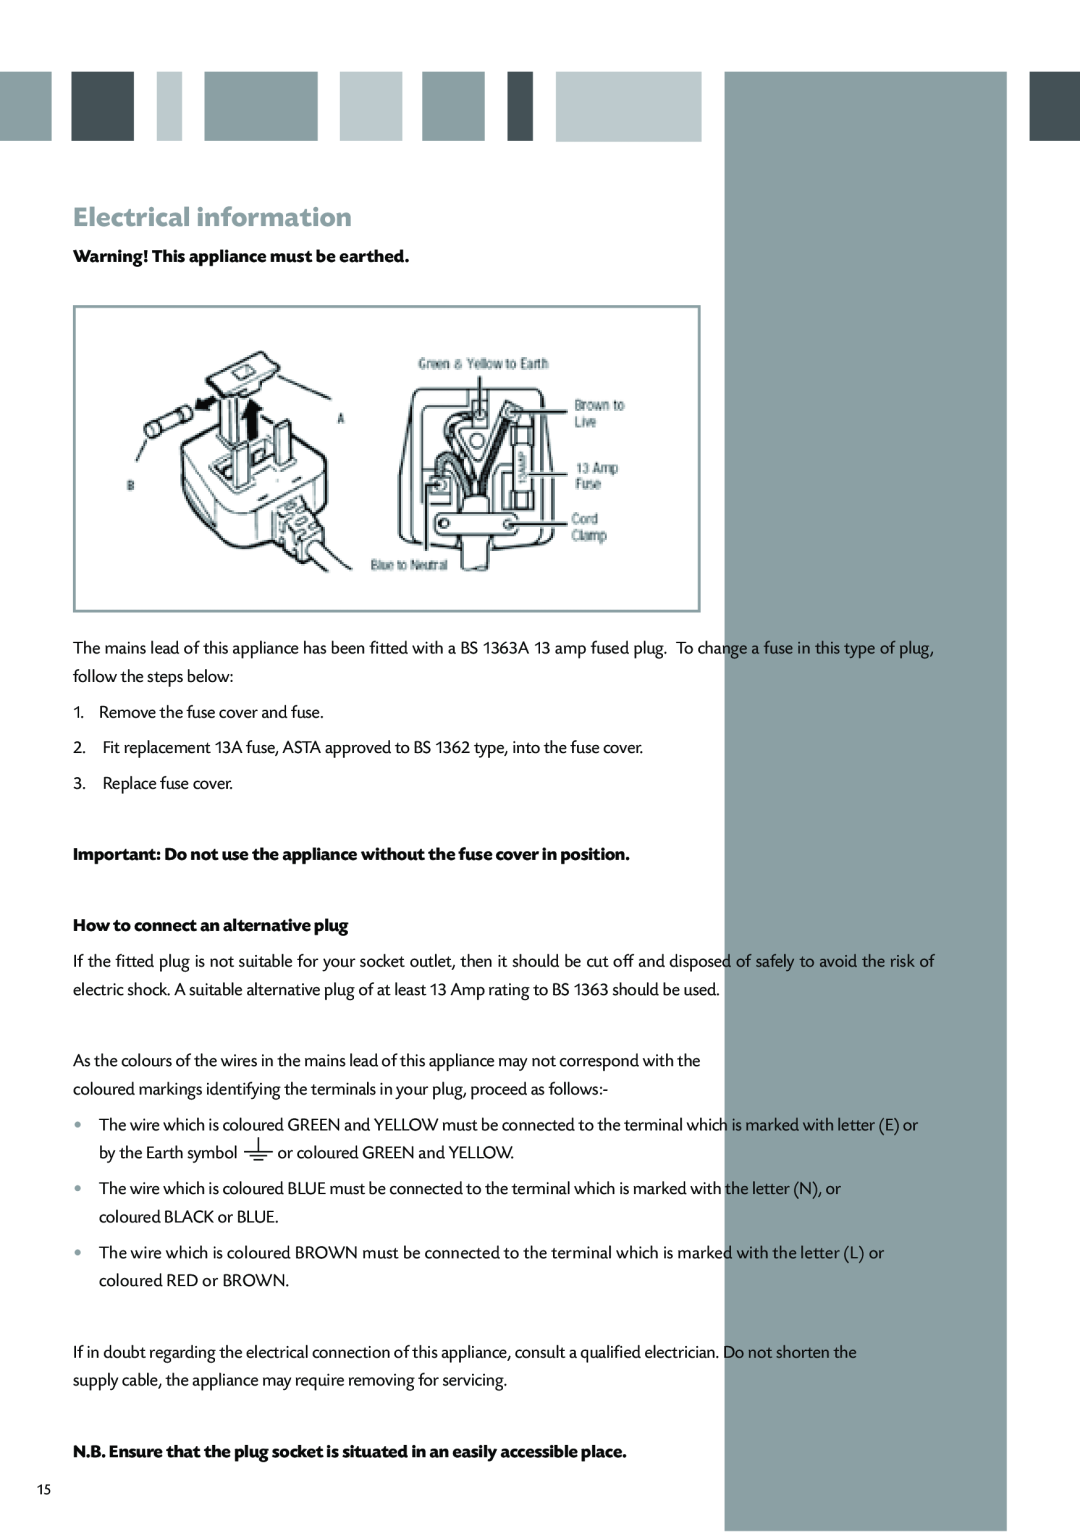 CDA WC370 manual Electrical information, Warning! This appliance must be earthed, How to connect an alternative plug 